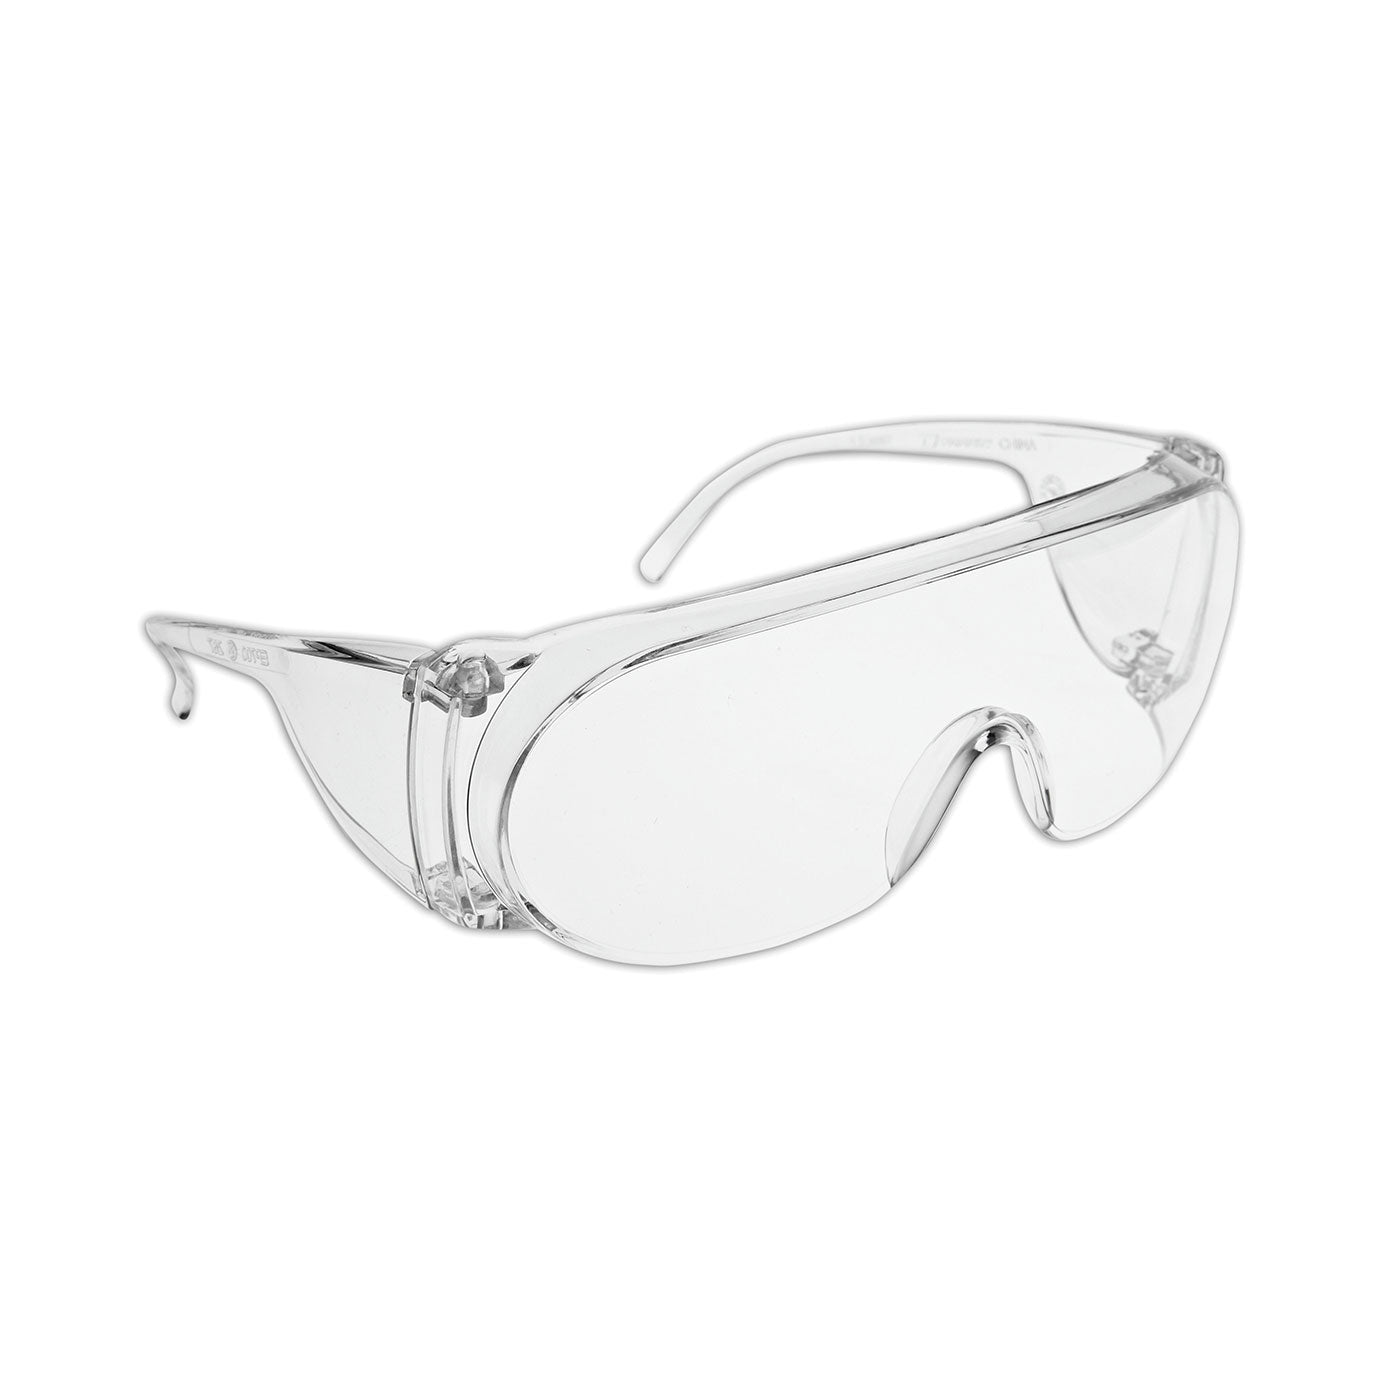 OTG Over-the-Glasses Safety Glasses with Clear Lens 700C